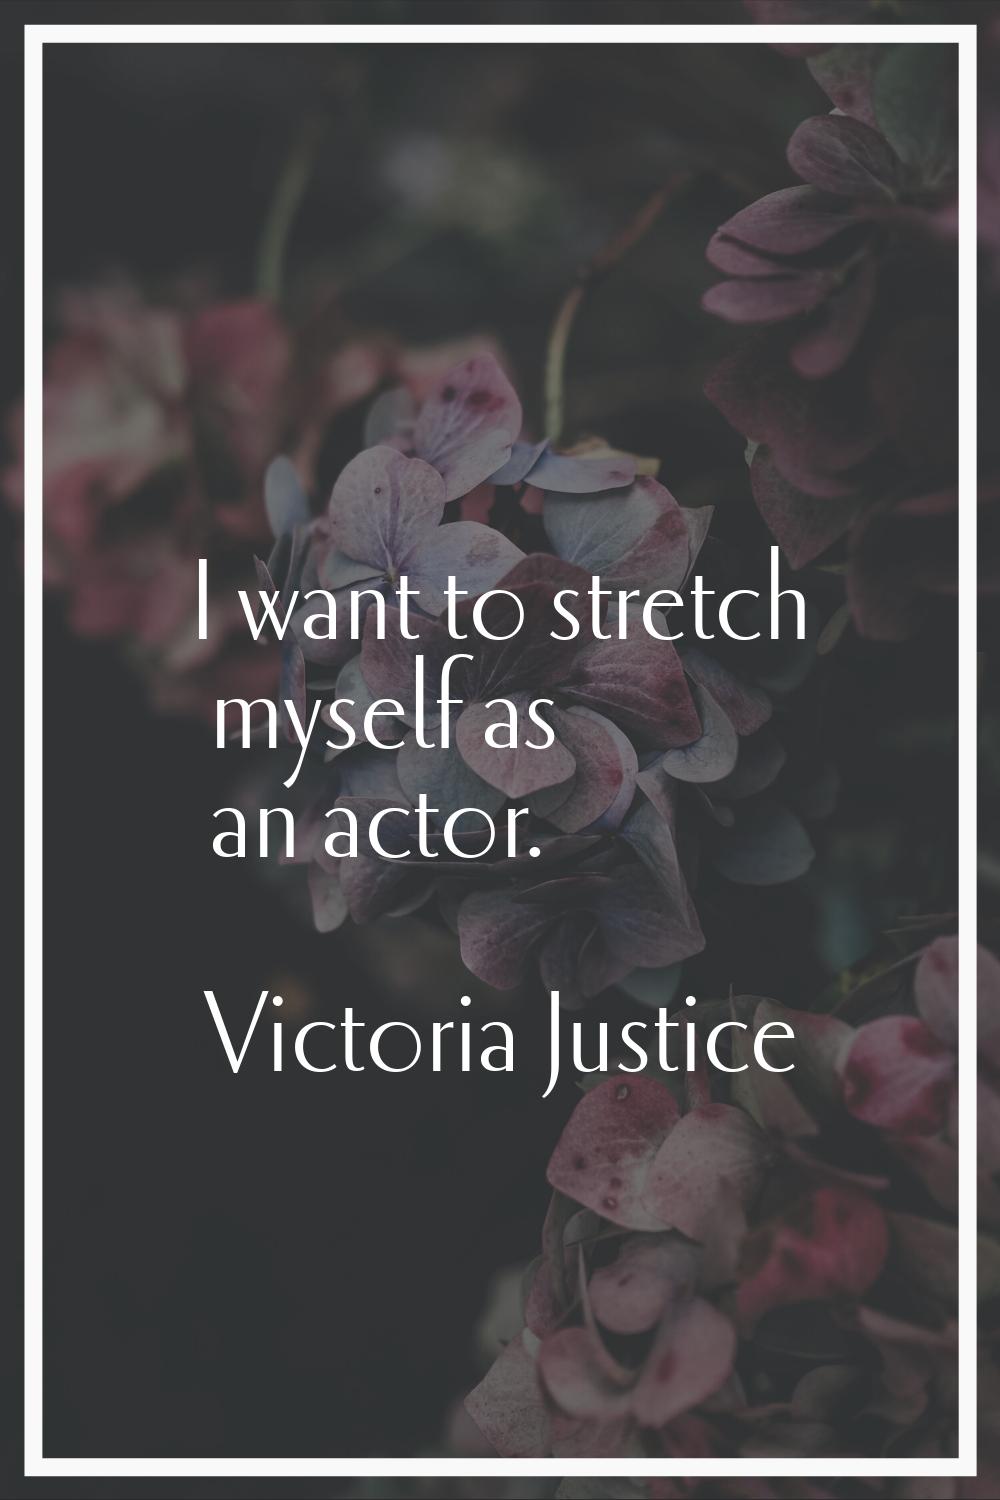 I want to stretch myself as an actor.